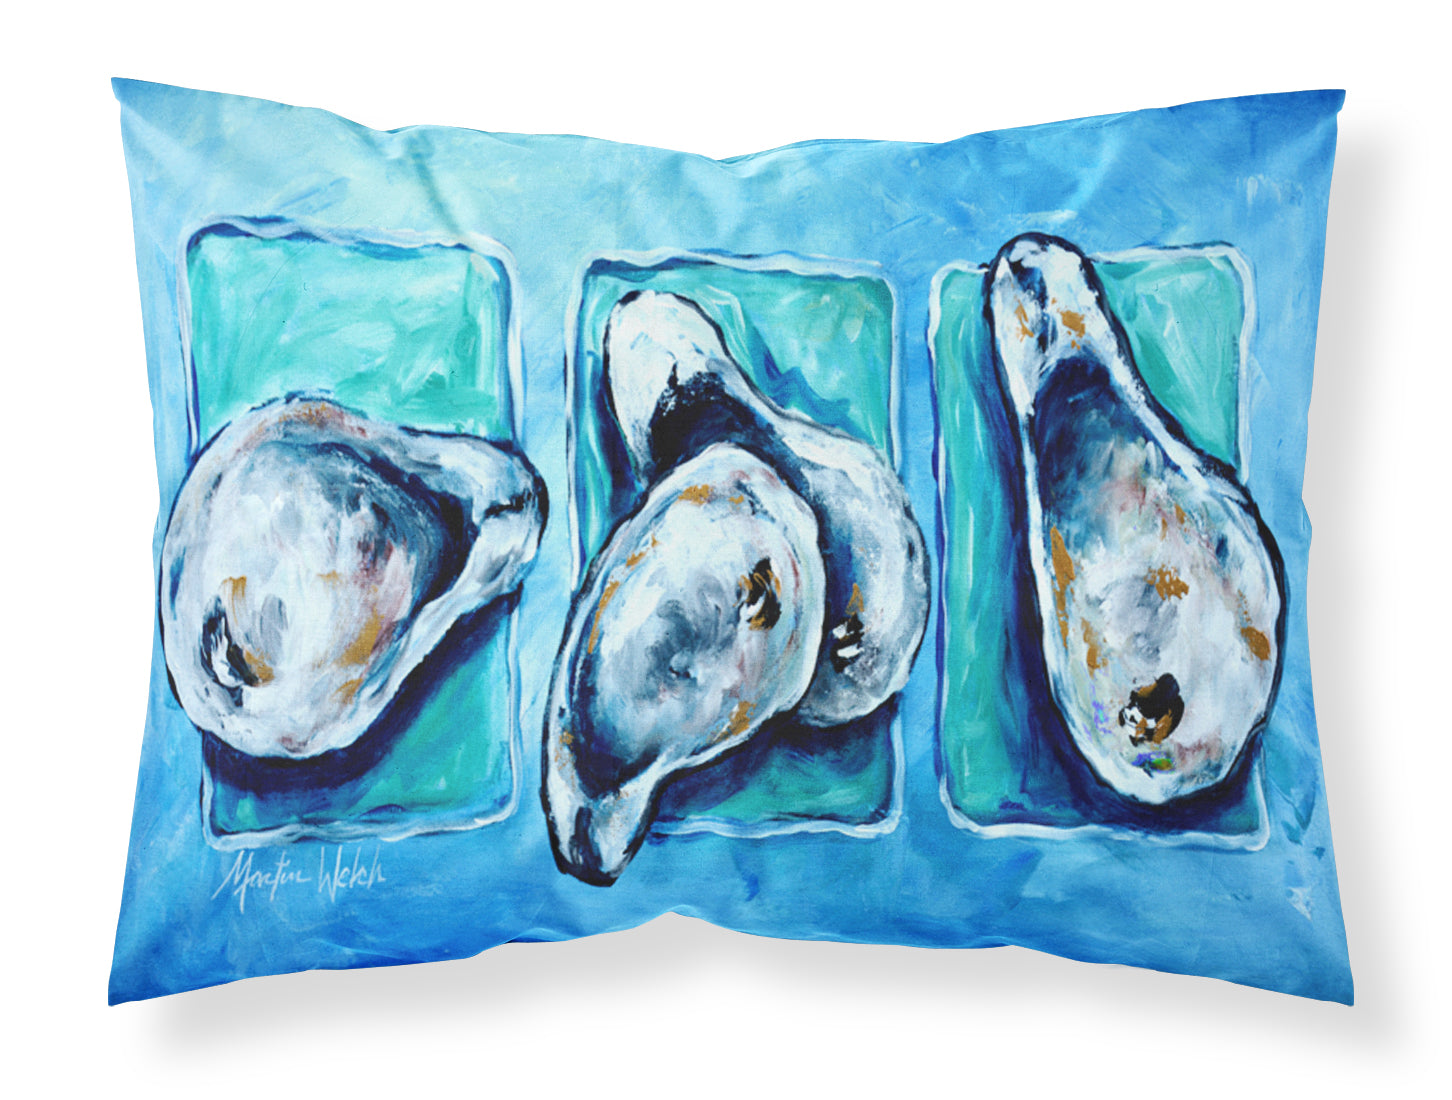 Buy this Oysters Oyster + Oyster = Oysters Fabric Standard Pillowcase